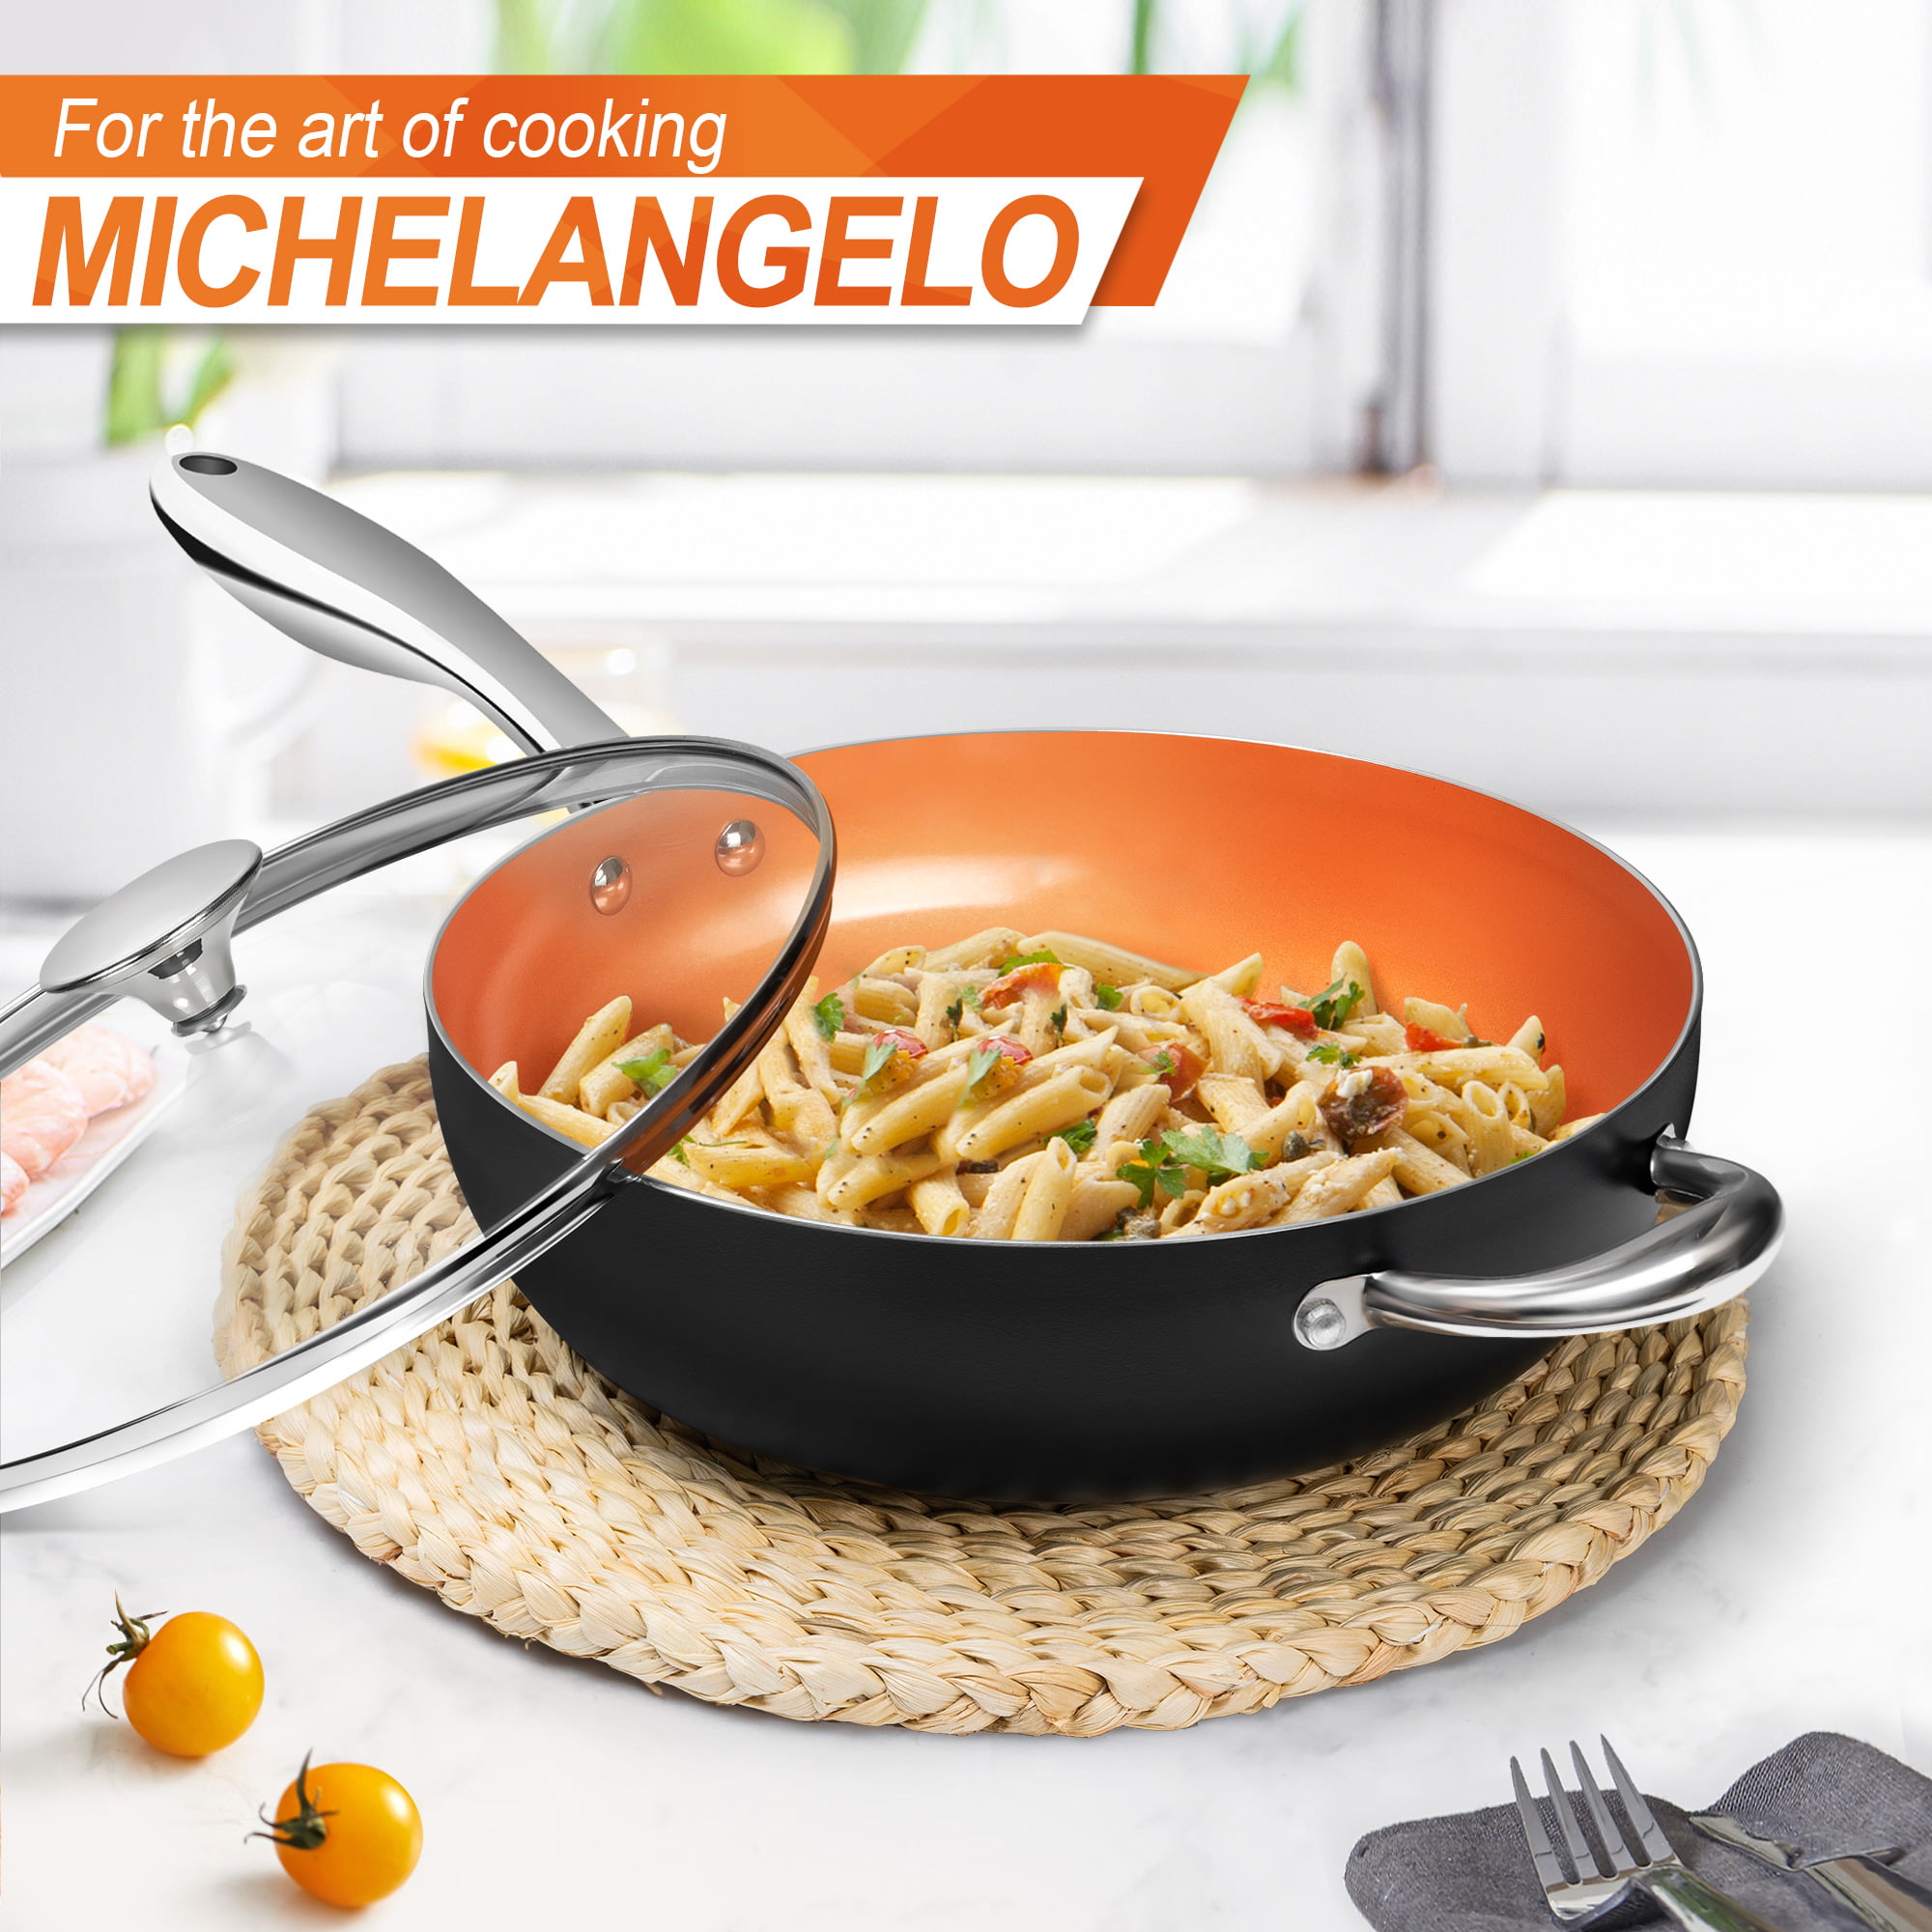 Michelangelo Wok Pan with Lid, 125 inch Stainless Steel Wok with Lid, Woks & Stir-Fry Pans with Honeycomb Coating, Nonstick Wok